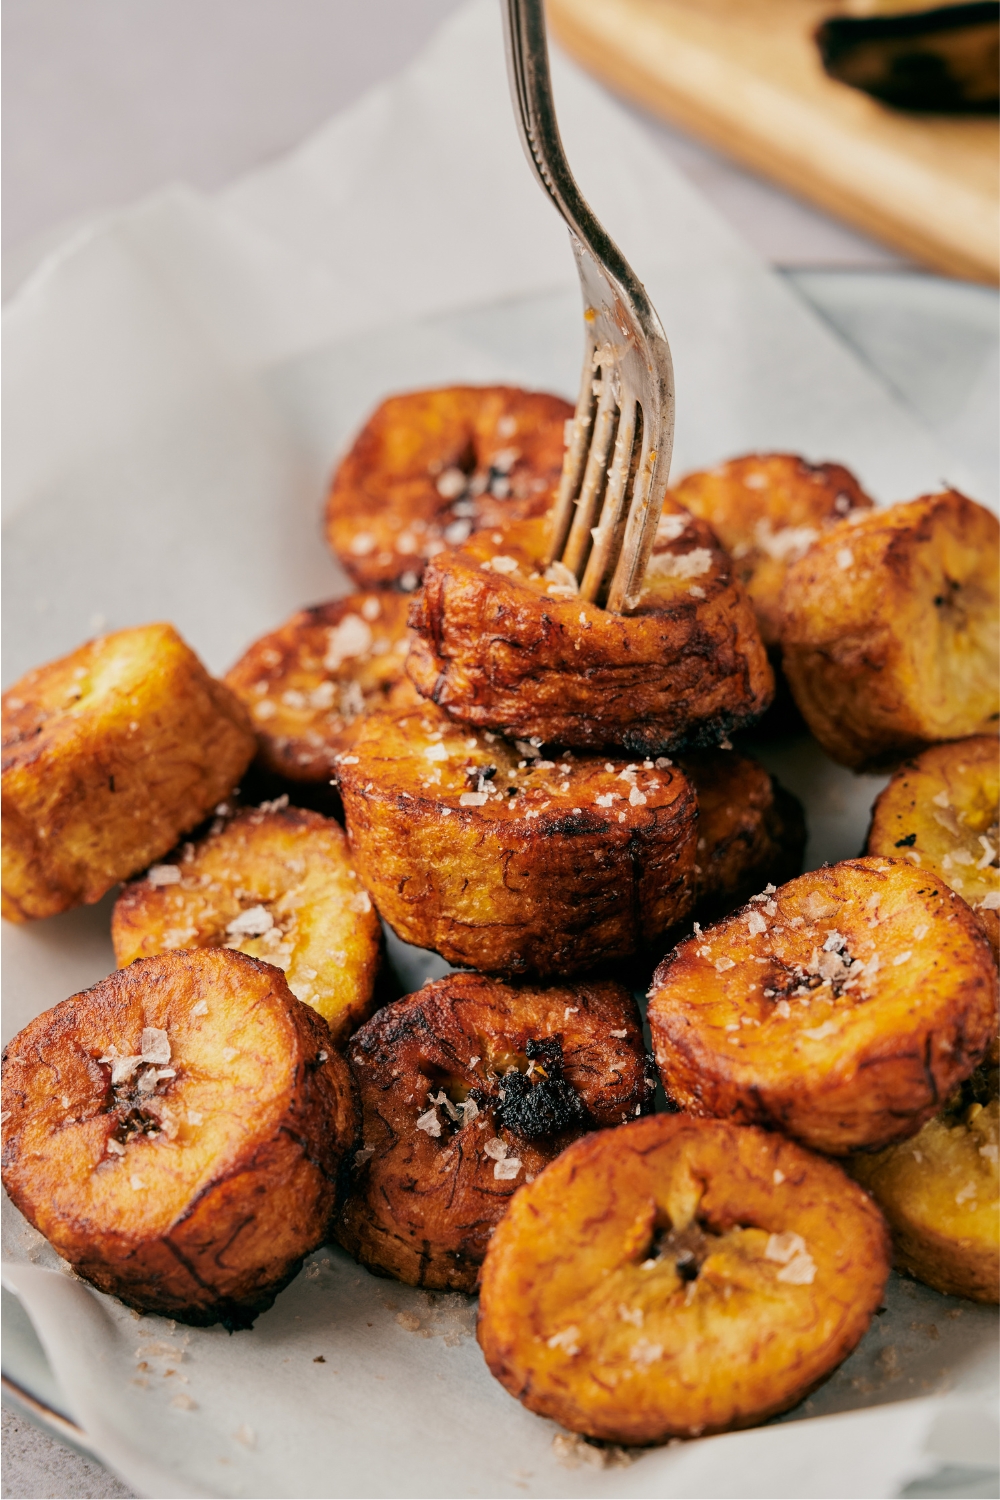 A fork piercing two fried plantain slices off a plate filled with fried plantains, all covered in coarse sea salt.